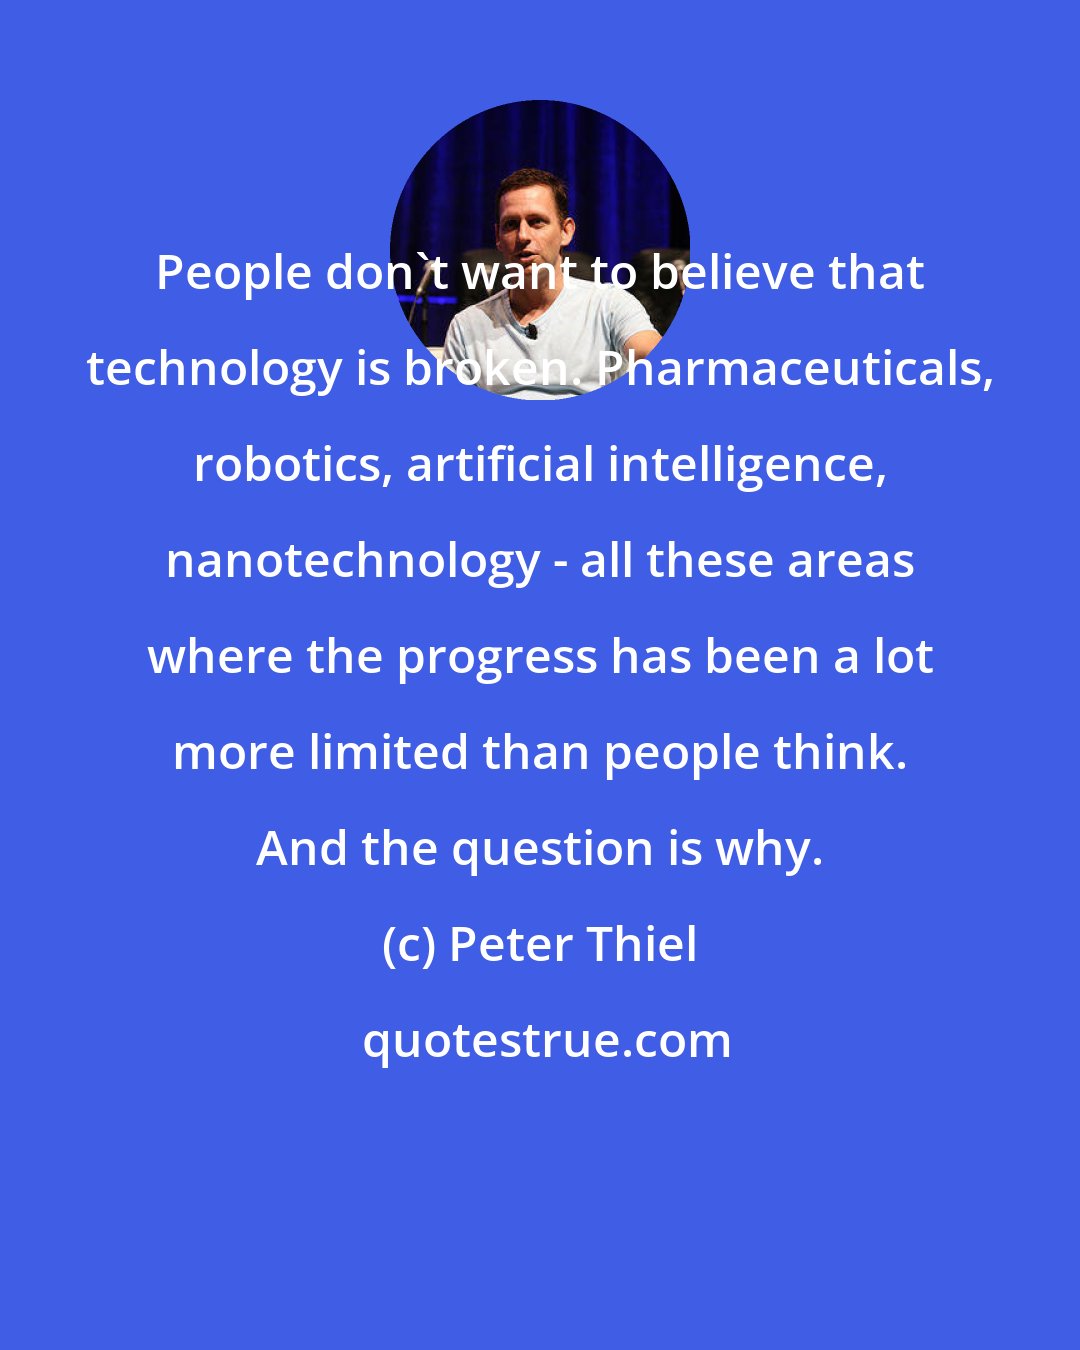 Peter Thiel: People don't want to believe that technology is broken. Pharmaceuticals, robotics, artificial intelligence, nanotechnology - all these areas where the progress has been a lot more limited than people think. And the question is why.